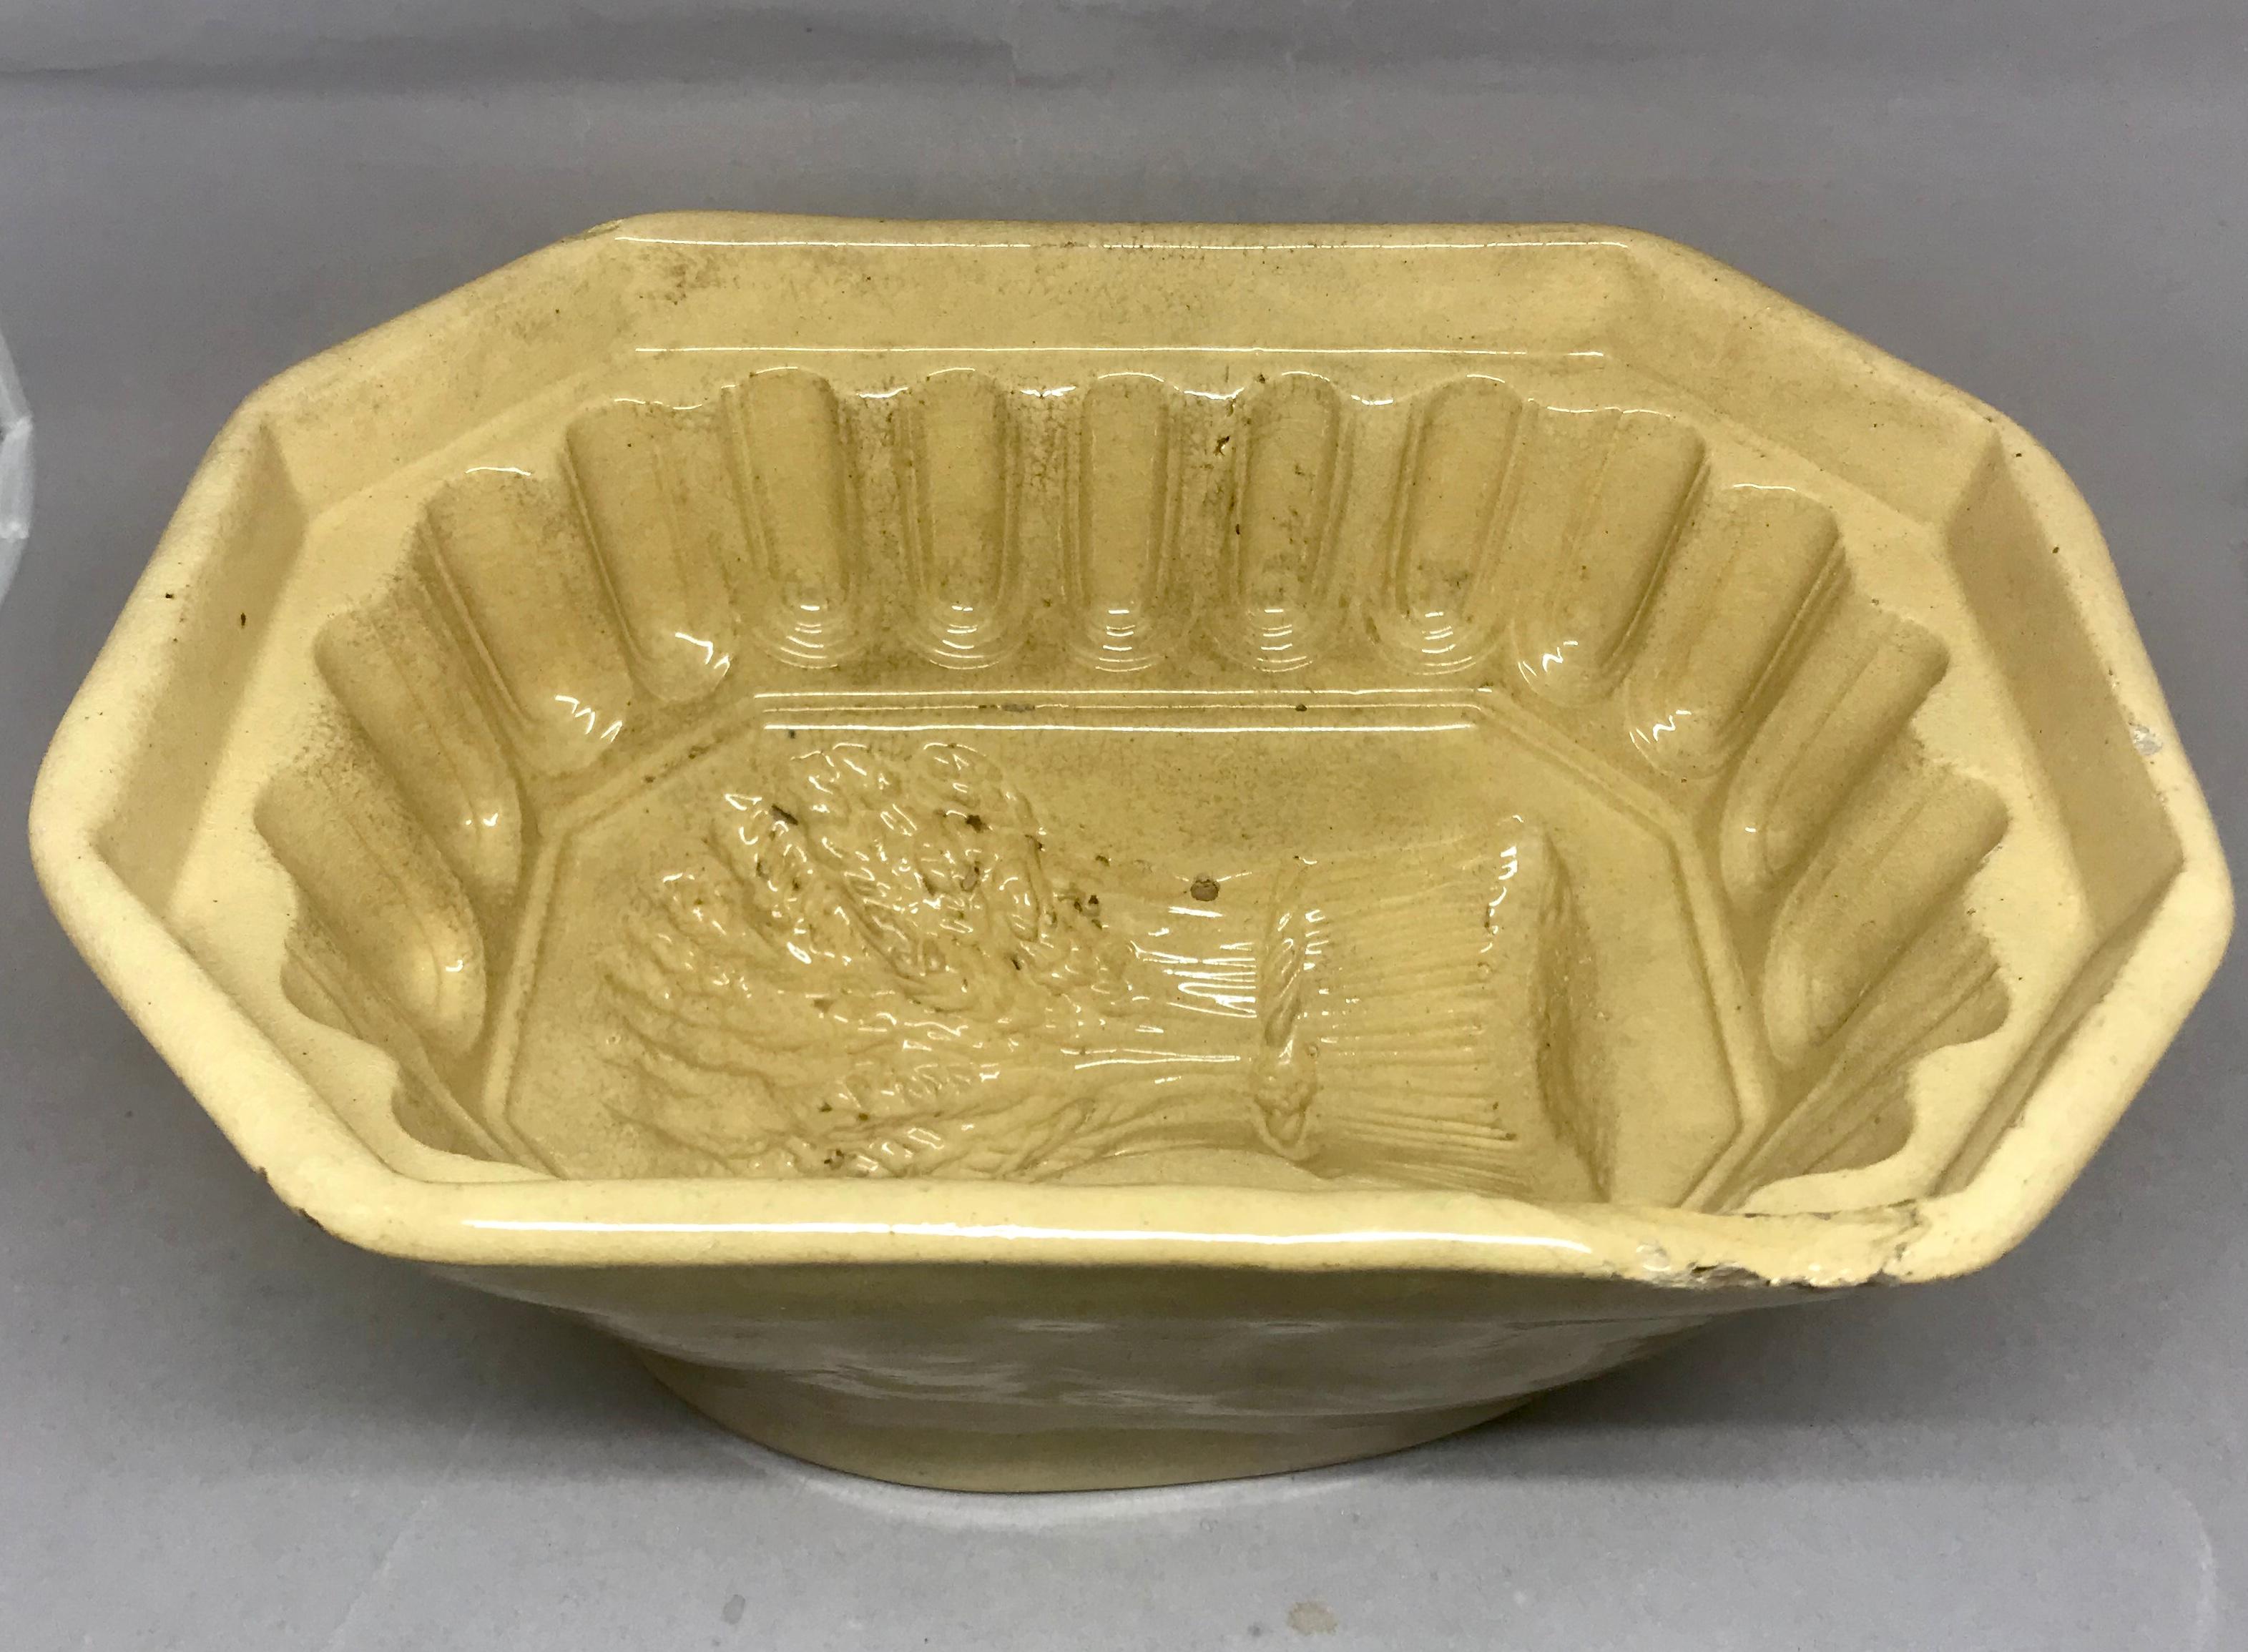 Yellow ware wheat sheaves jelly pudding mould. Antique glazed yellow ware pottery jelly/pudding mould with fluted inset rim and wheat sheaf design from New Jersey or Pennsylvania. Two small old losses to mould as seen in photos, United States, circa